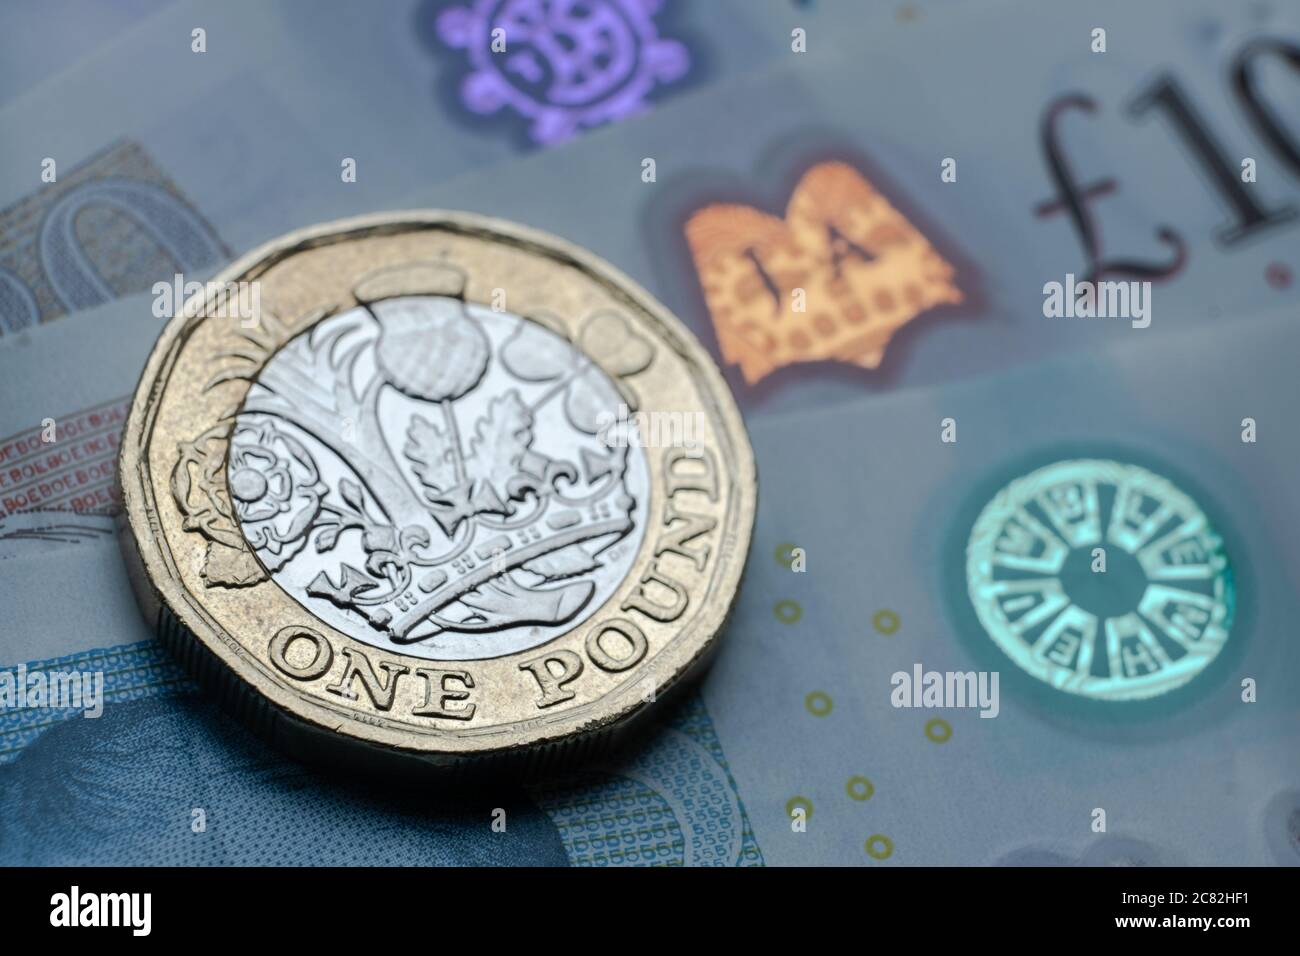 British one Pound coin place on top of new polymer banknotes with visible pound symbol and hologram, Stock Photo